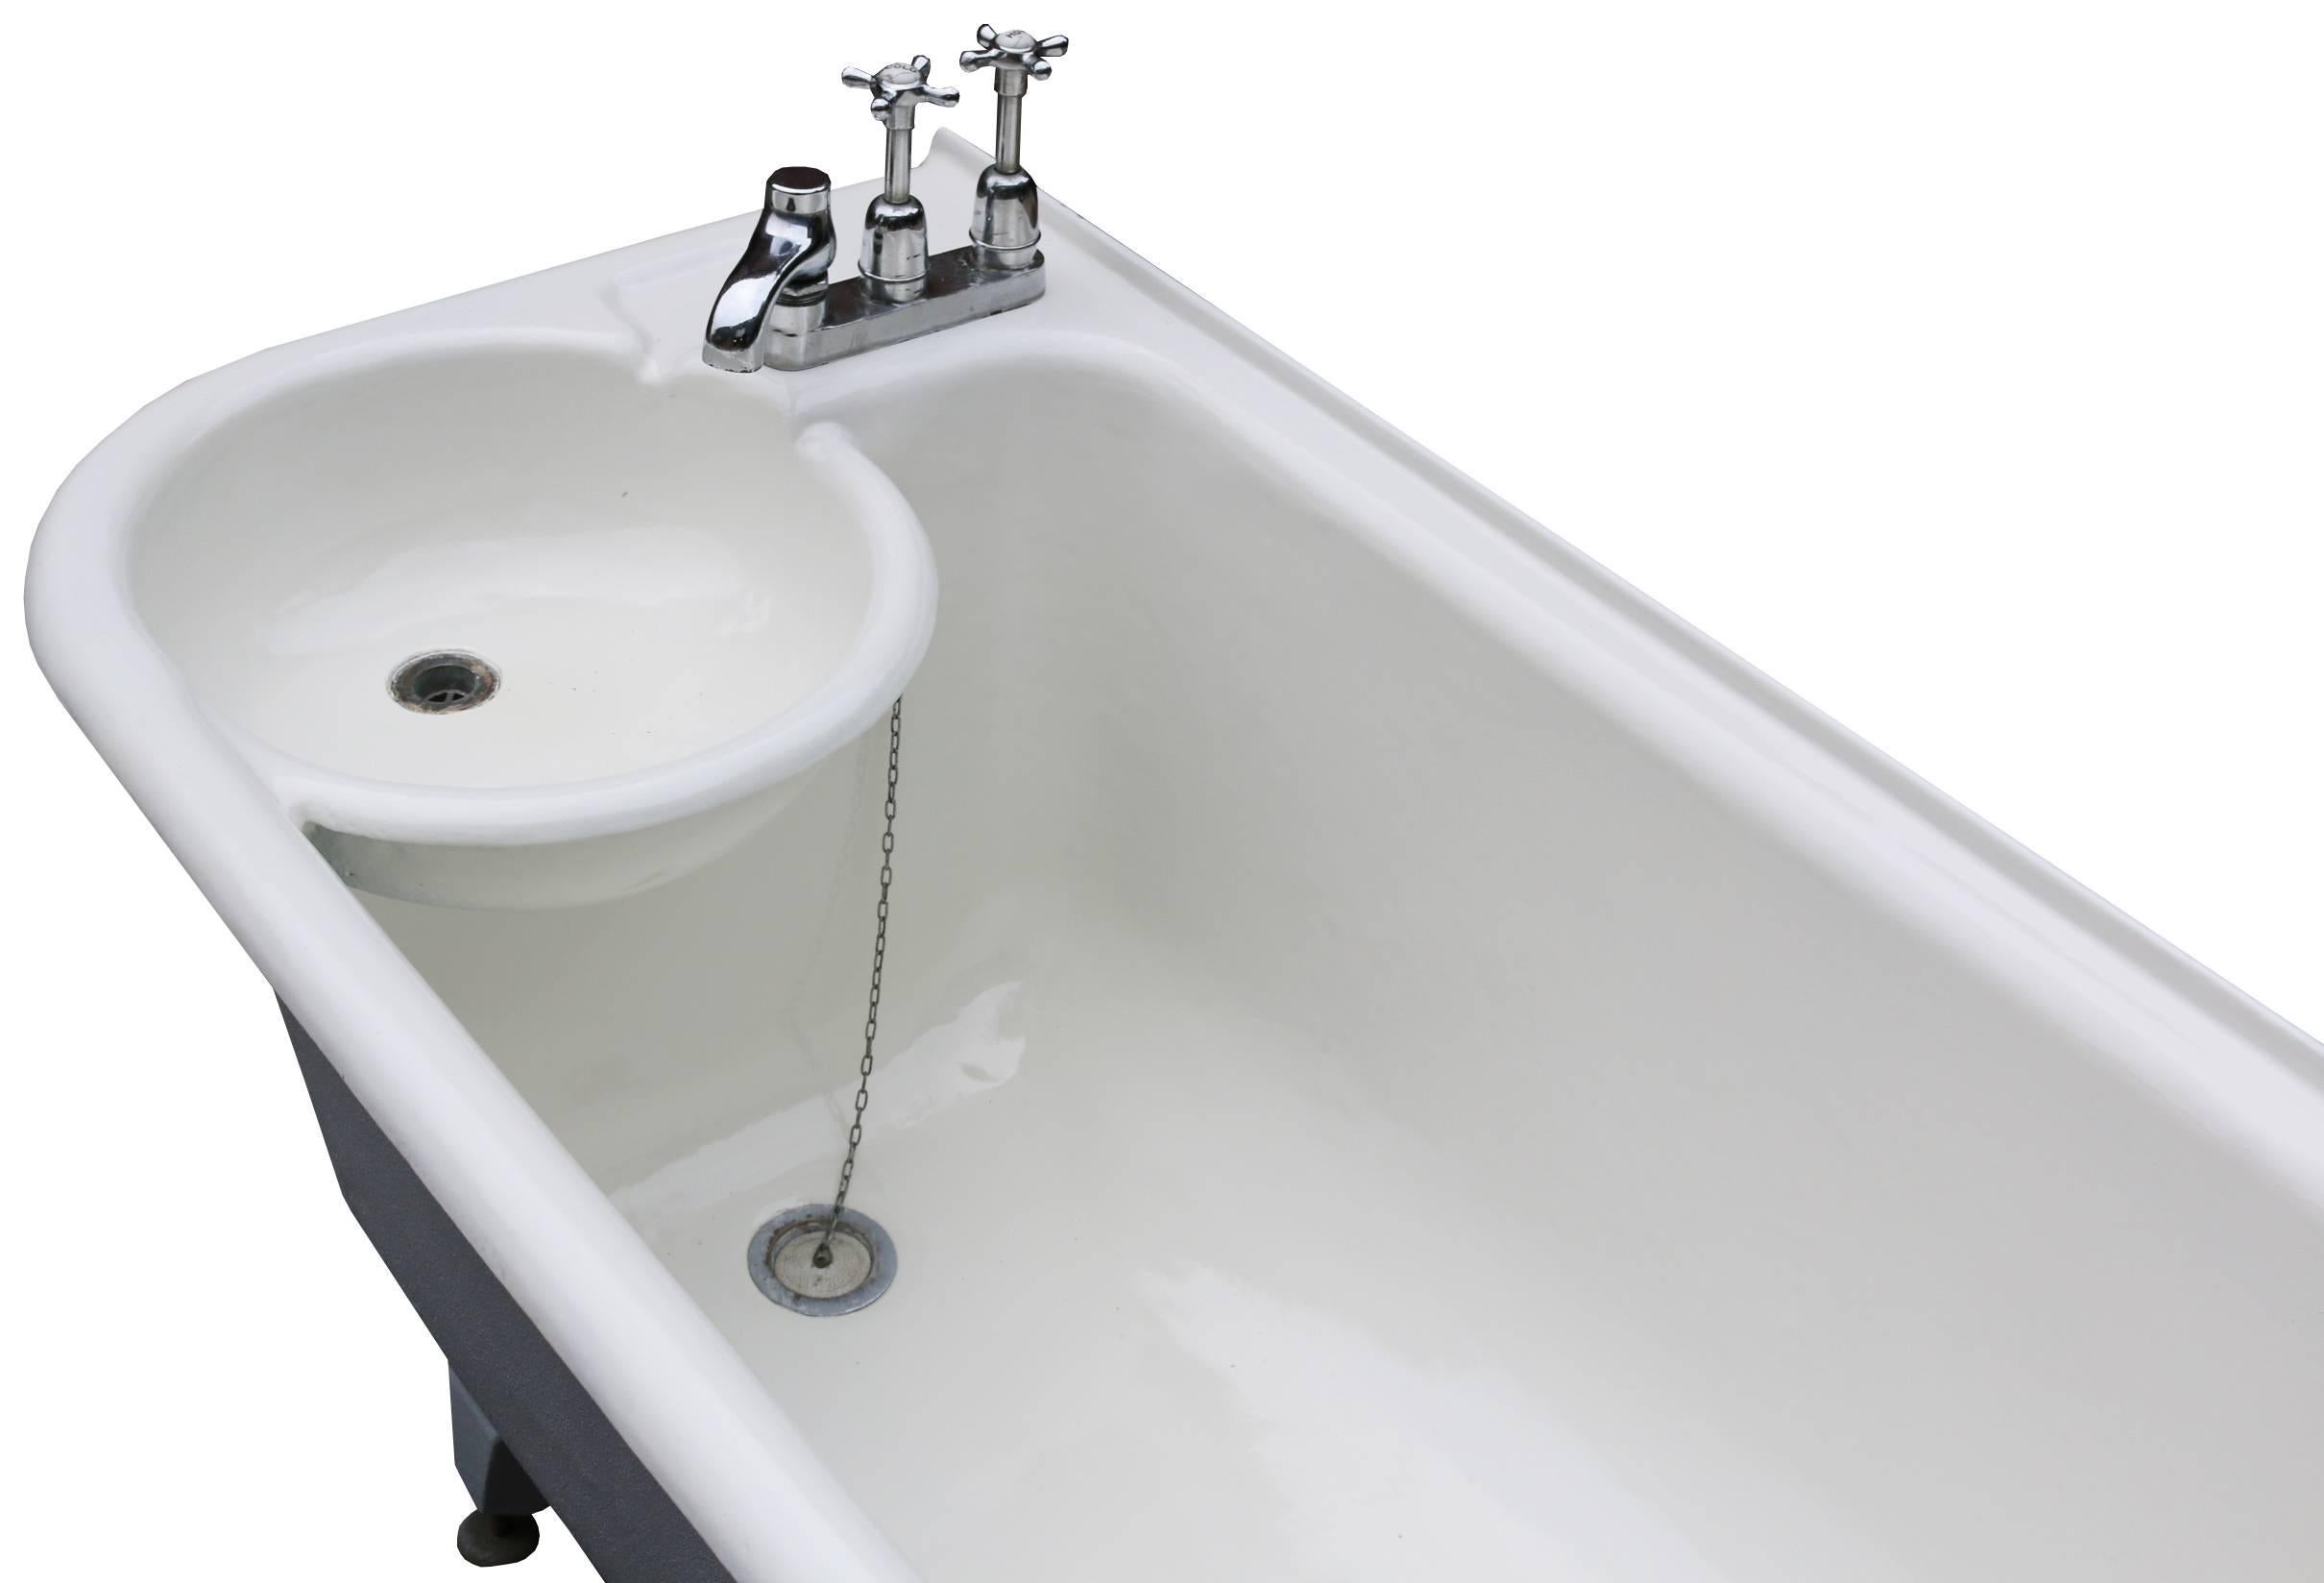 This bath has a painted enamel finish.
Weight 150 kg.